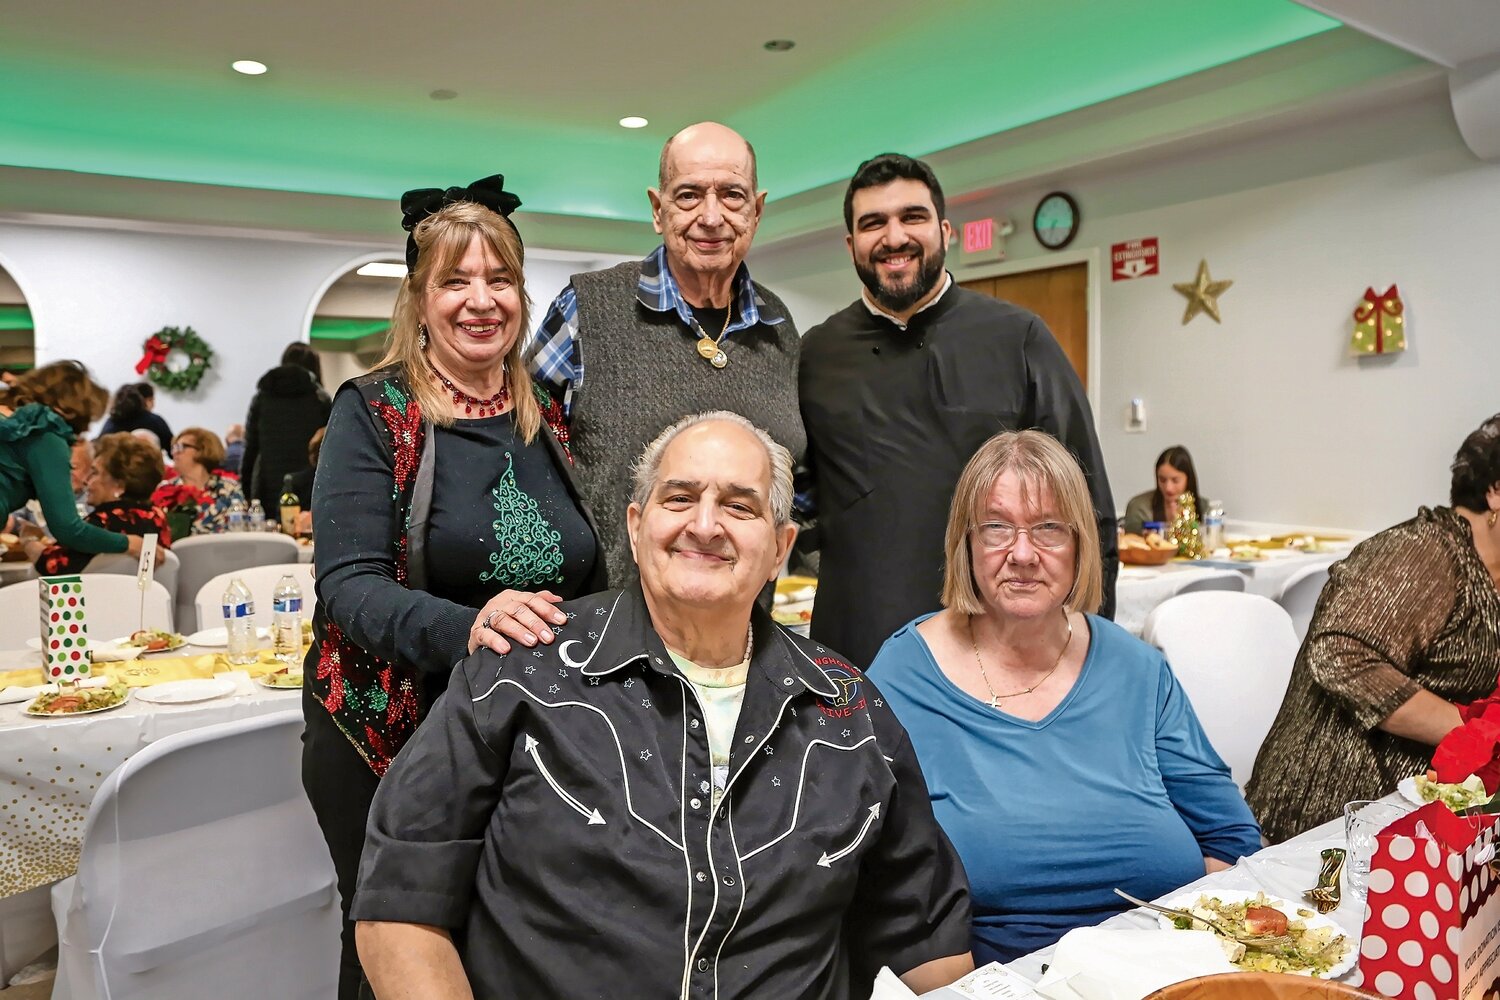 It was a very merry evening at the Greek Orthodox Panaghia Church. Father George Kazoulis,right, enjoyed the festivities with Joe Ponte, Ellen Ponte, Lisa Volts and Mike Ponte.